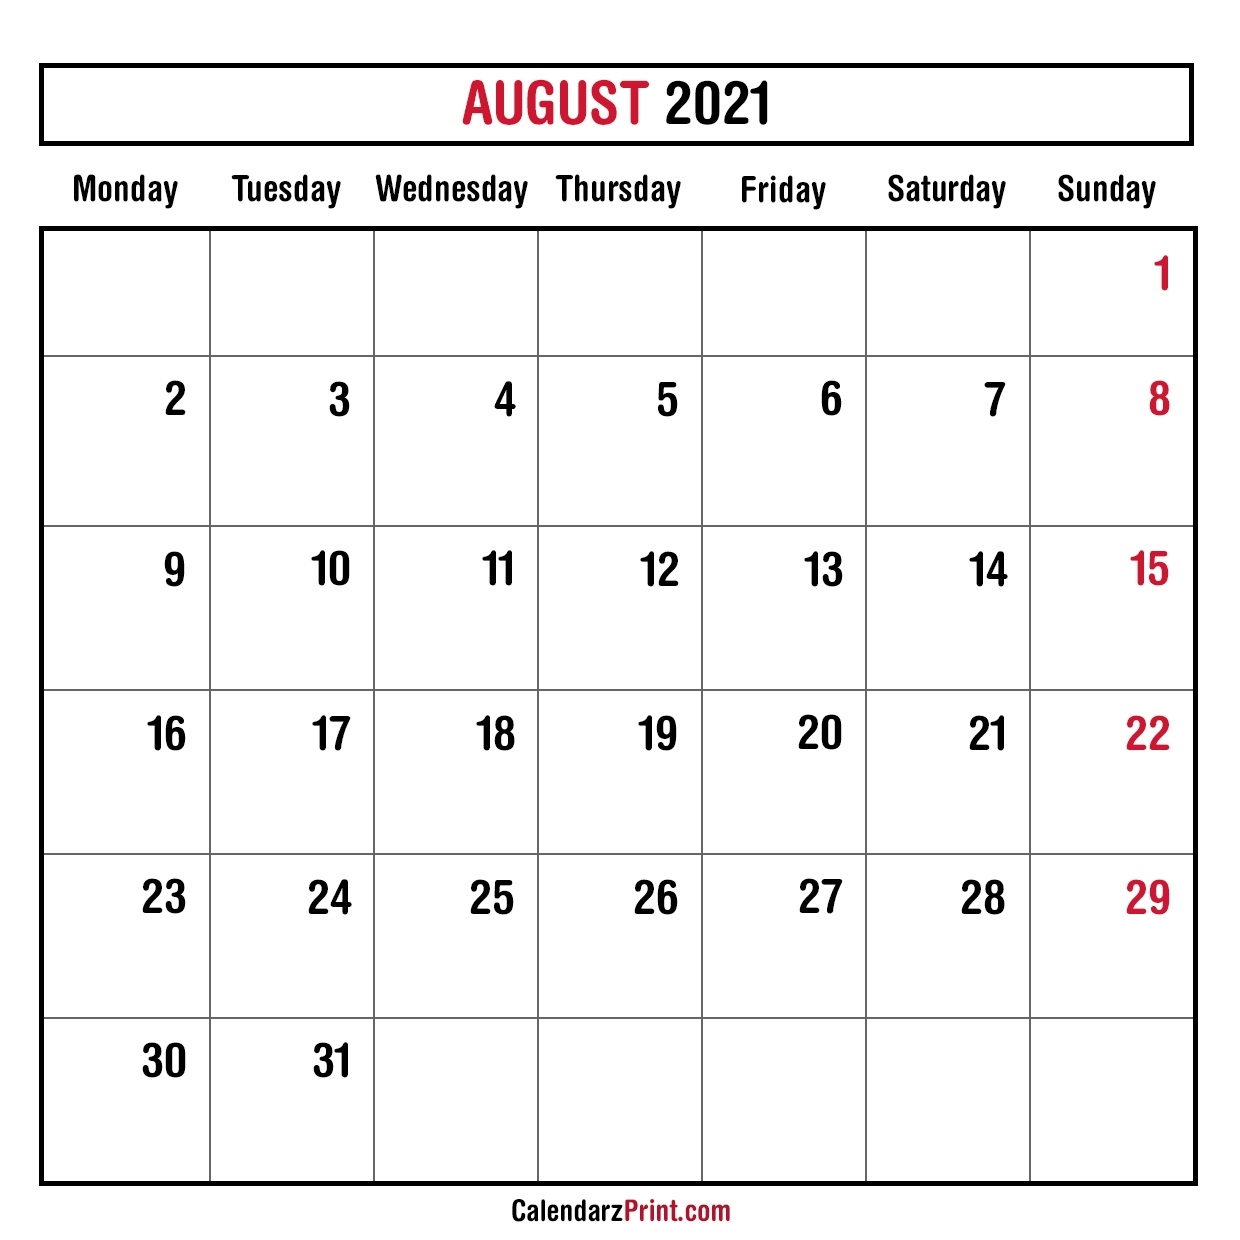 August 2021 Monthly Planner Calendar, Printable Free - Monday Start - Calendarzprint | Free August 2021 Calendar Reading